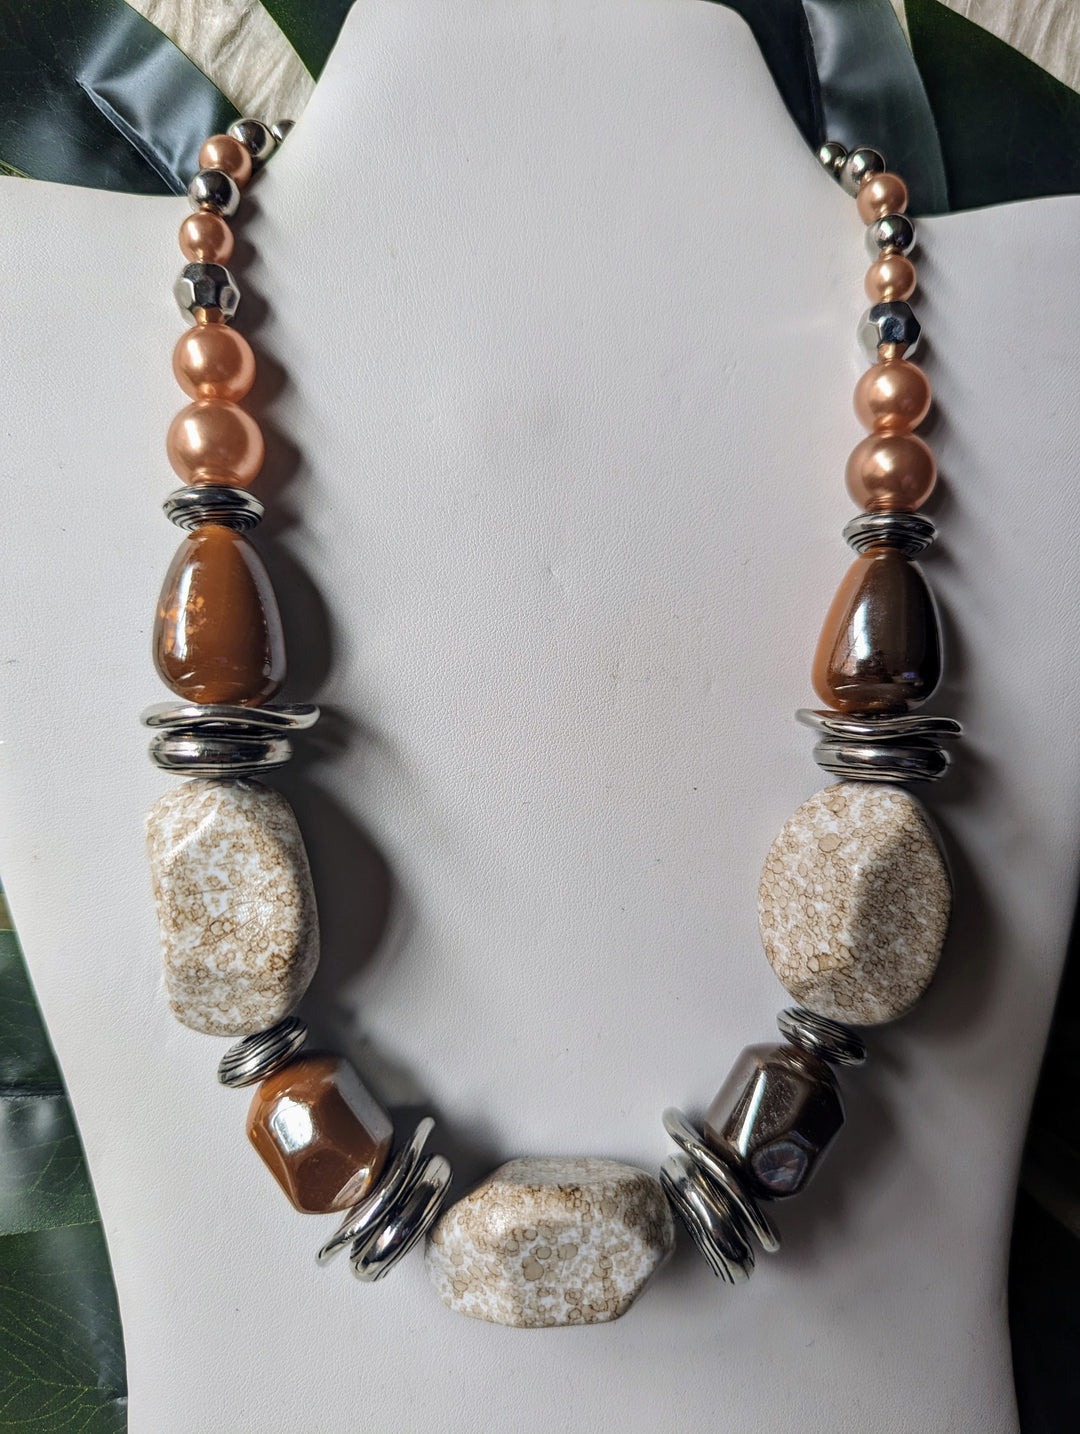 Vintage - Chunky Beaded Earth Tone Necklace